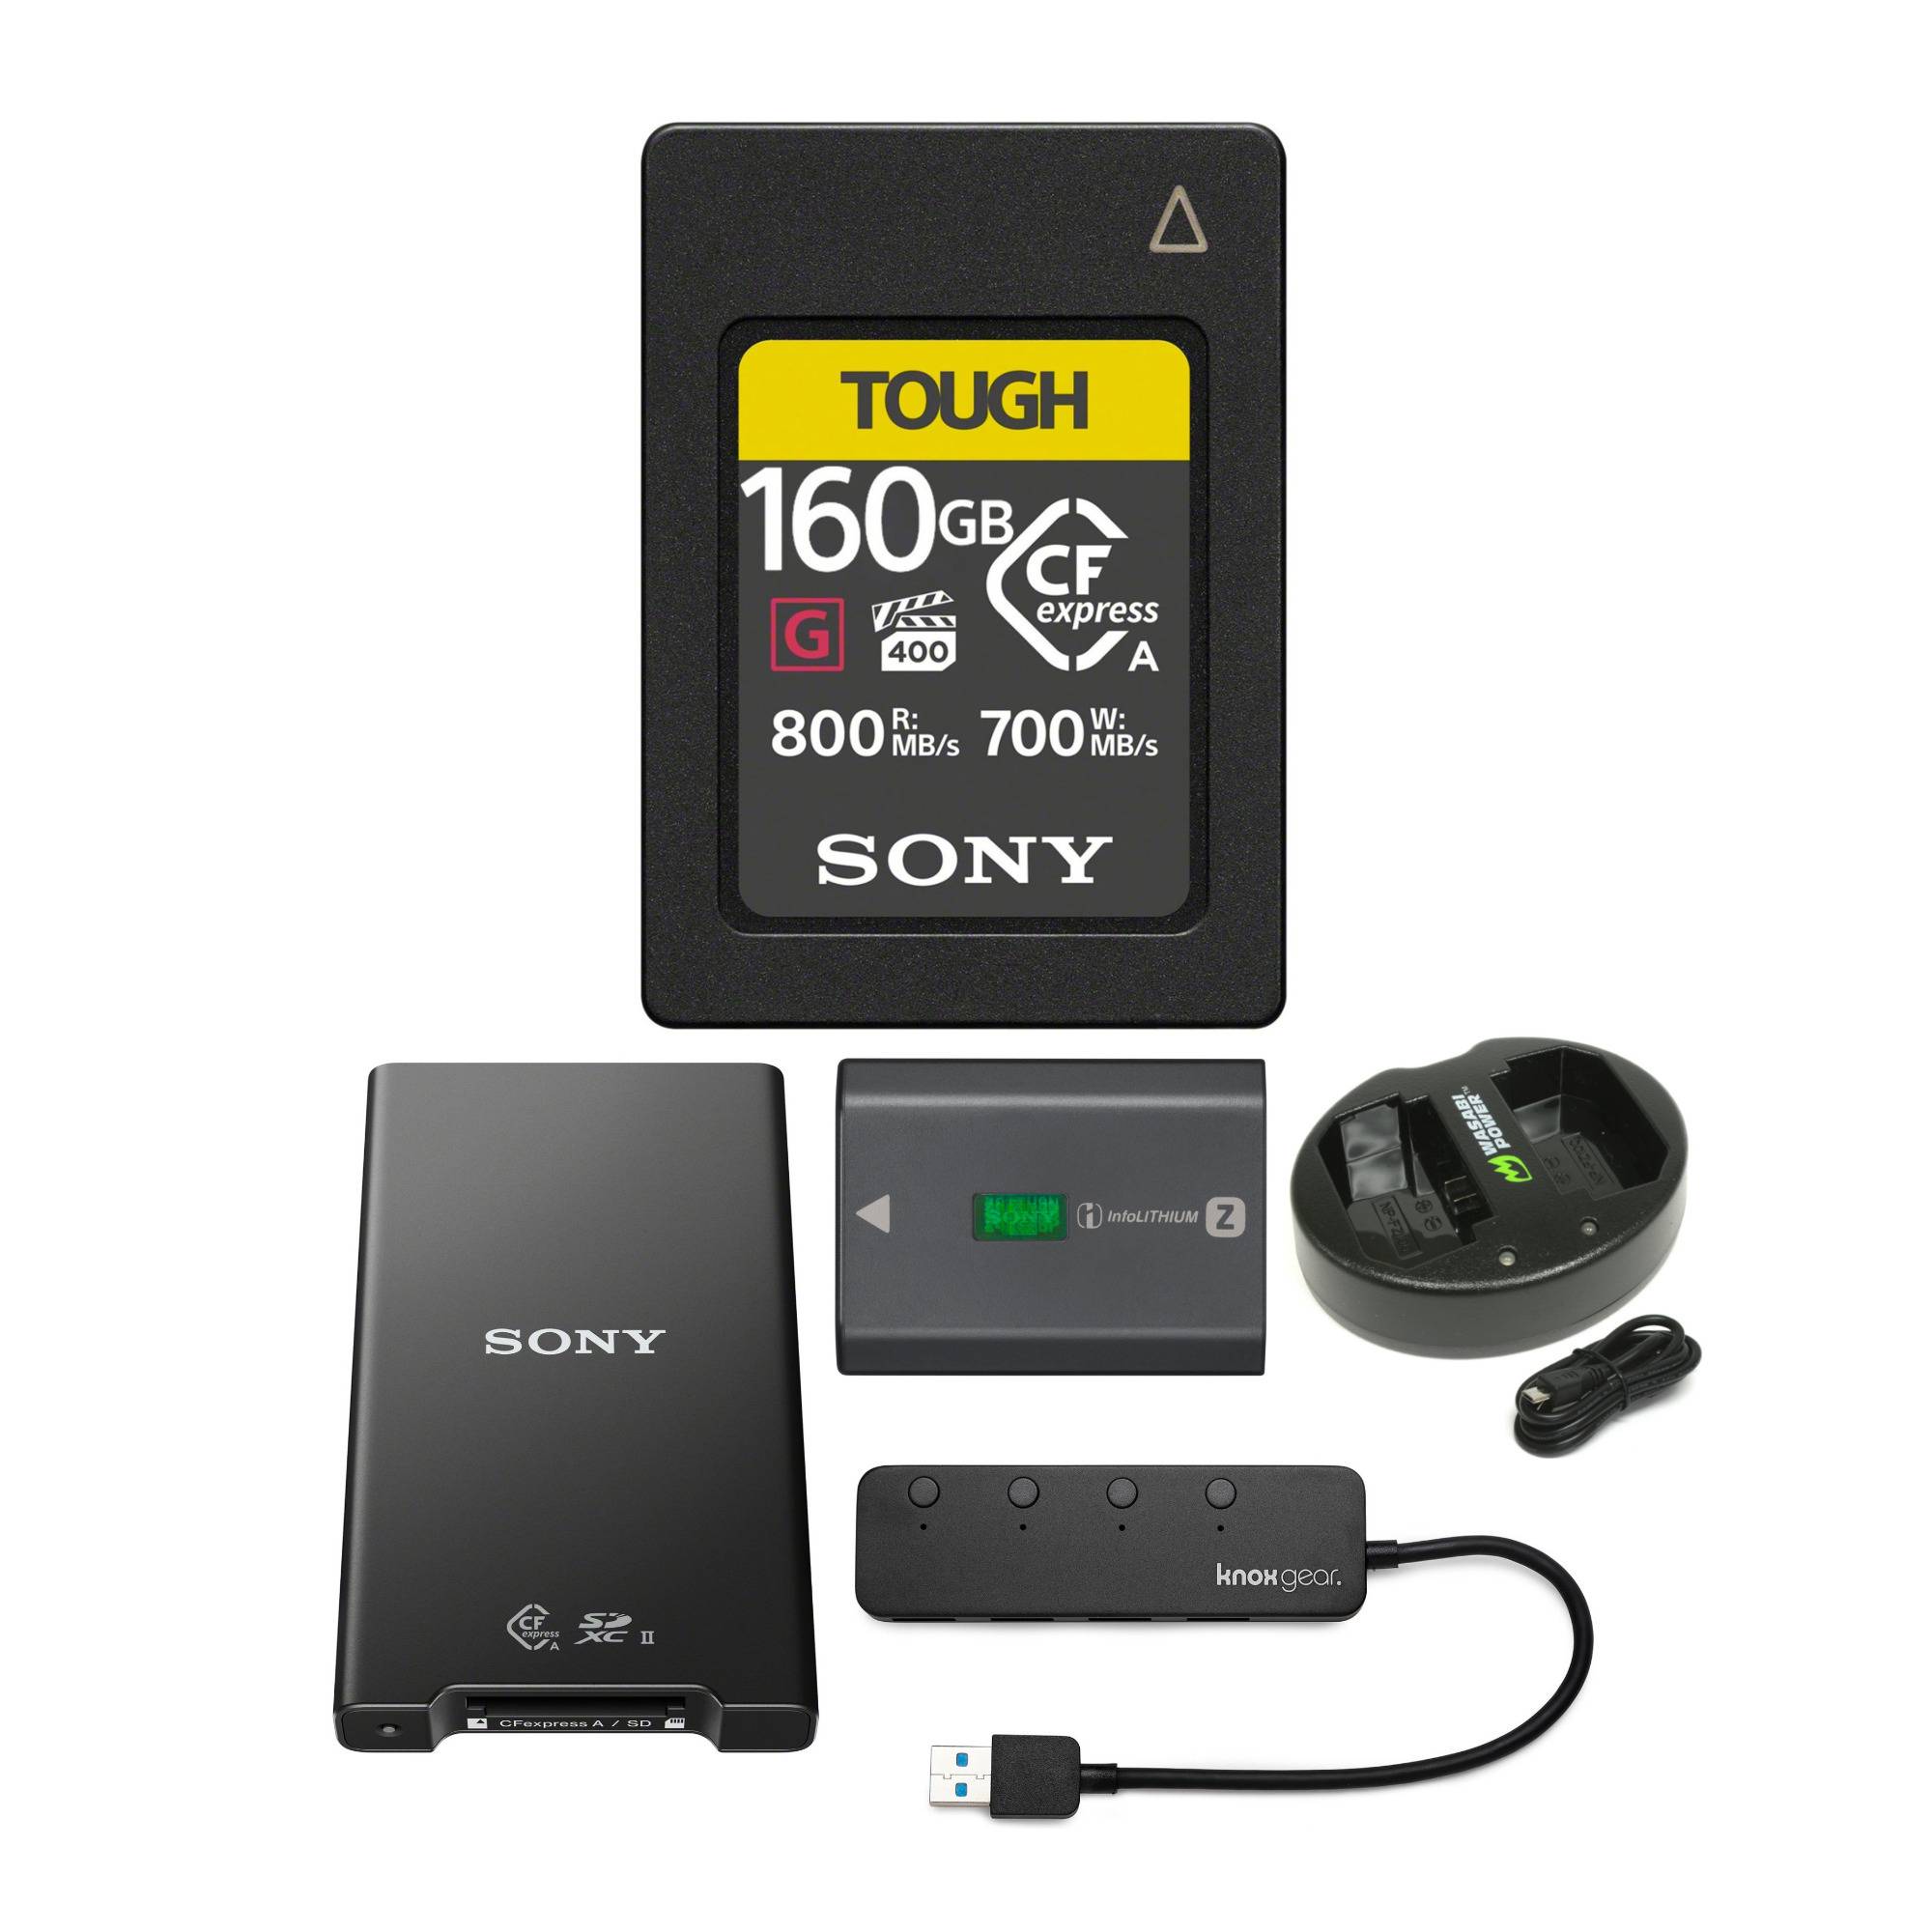 Sony CFexpress Type A 160GB Memory Card Card Reader, USB Hub, Z-Series Battery Pack Charger Bundle